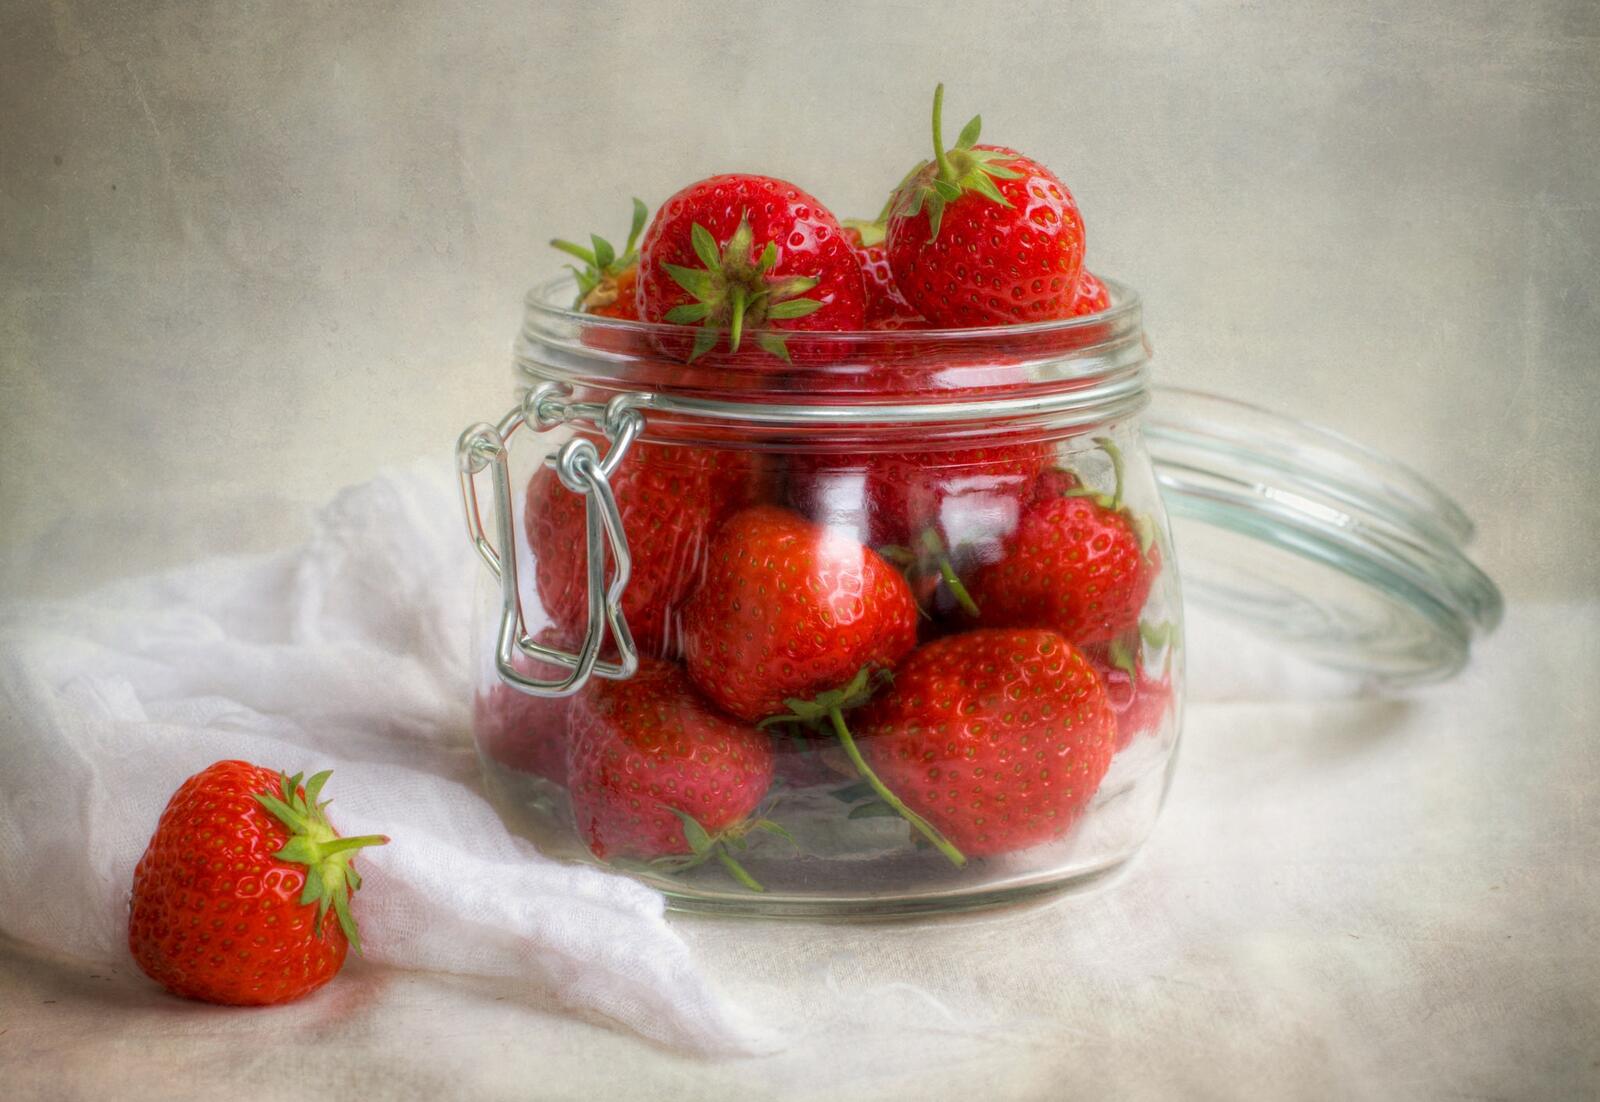 Free photo Red strawberries in a jar